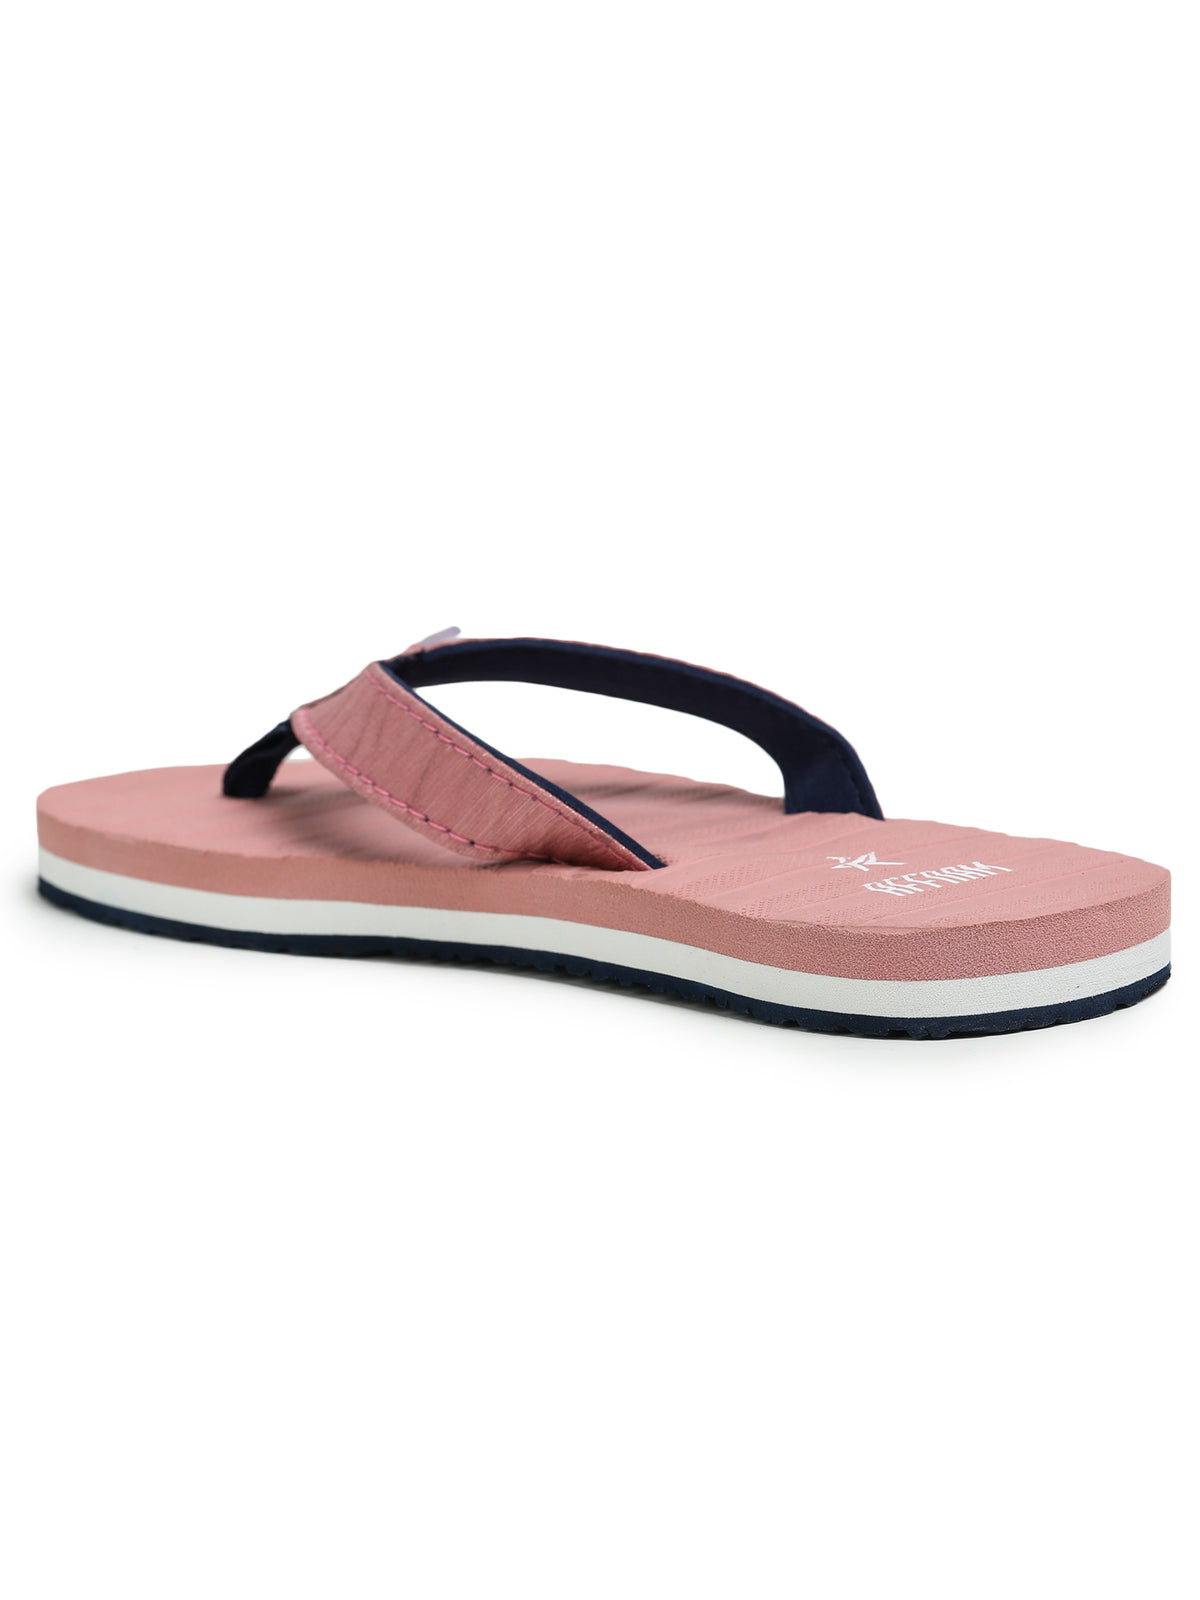 Pink Solid Leather Slip On Casual Slippers For Women